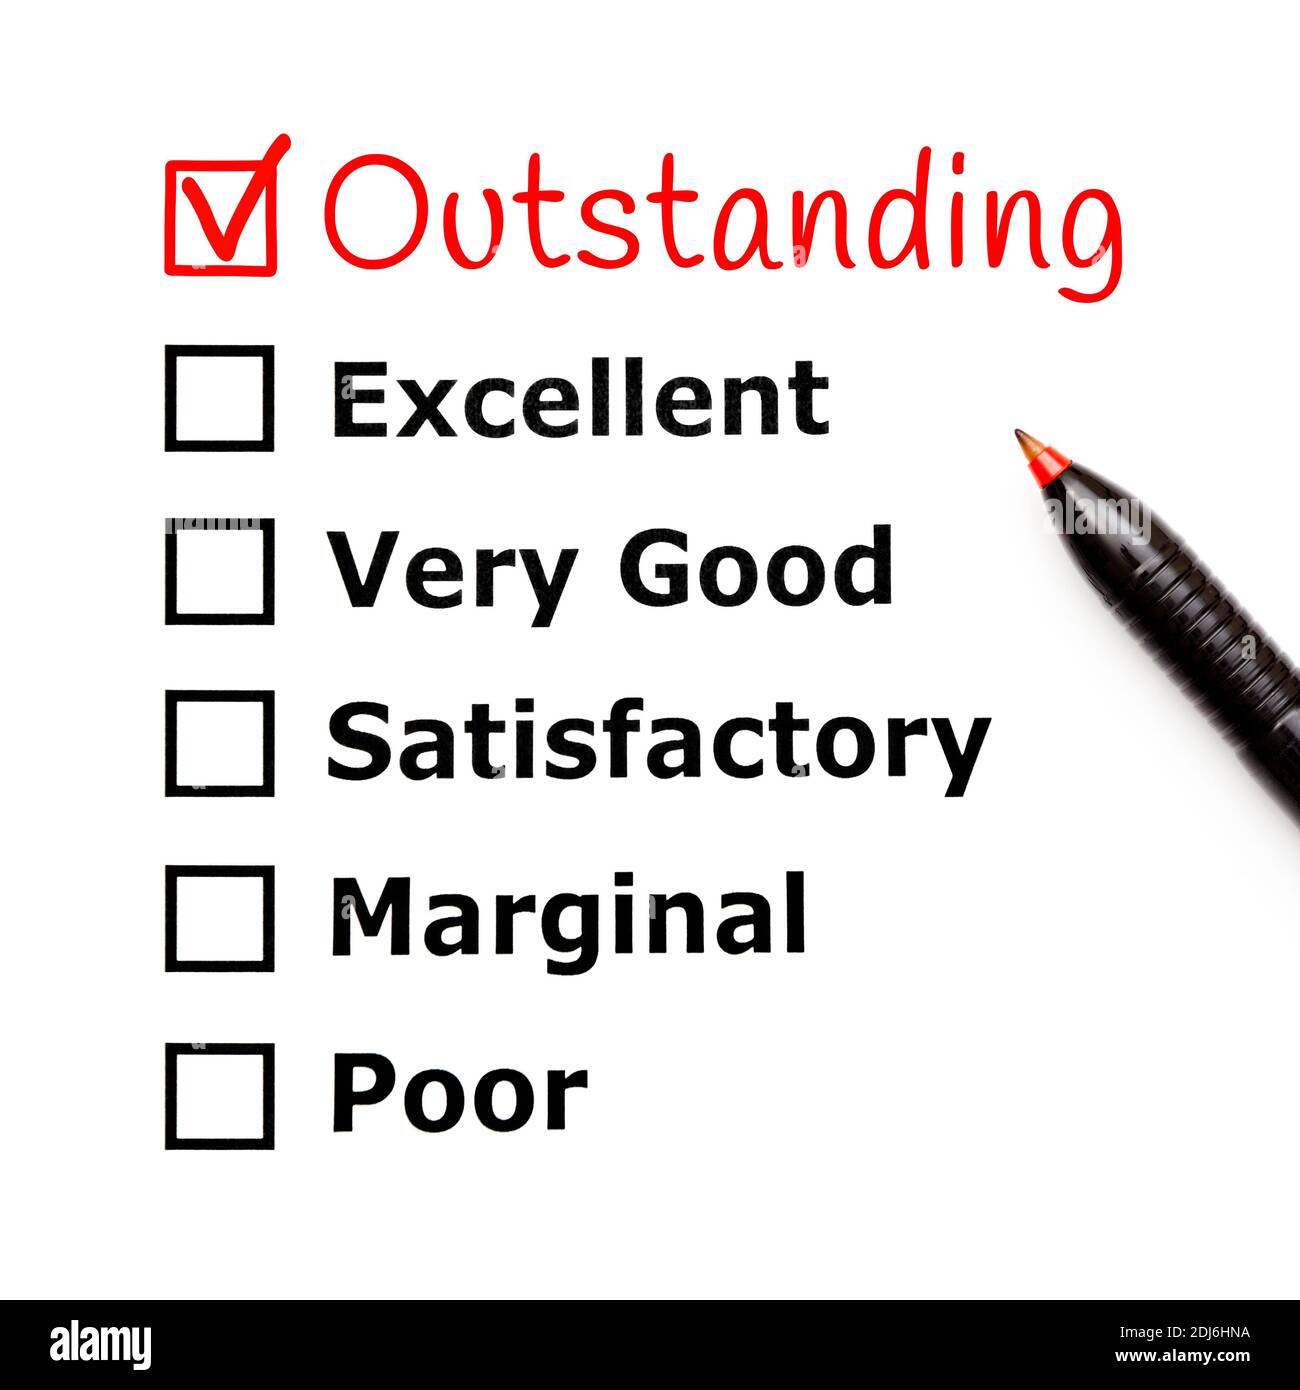 Handwritten Outstanding with red pen on customer service evaluation form checklist added above excellent. Stock Photo